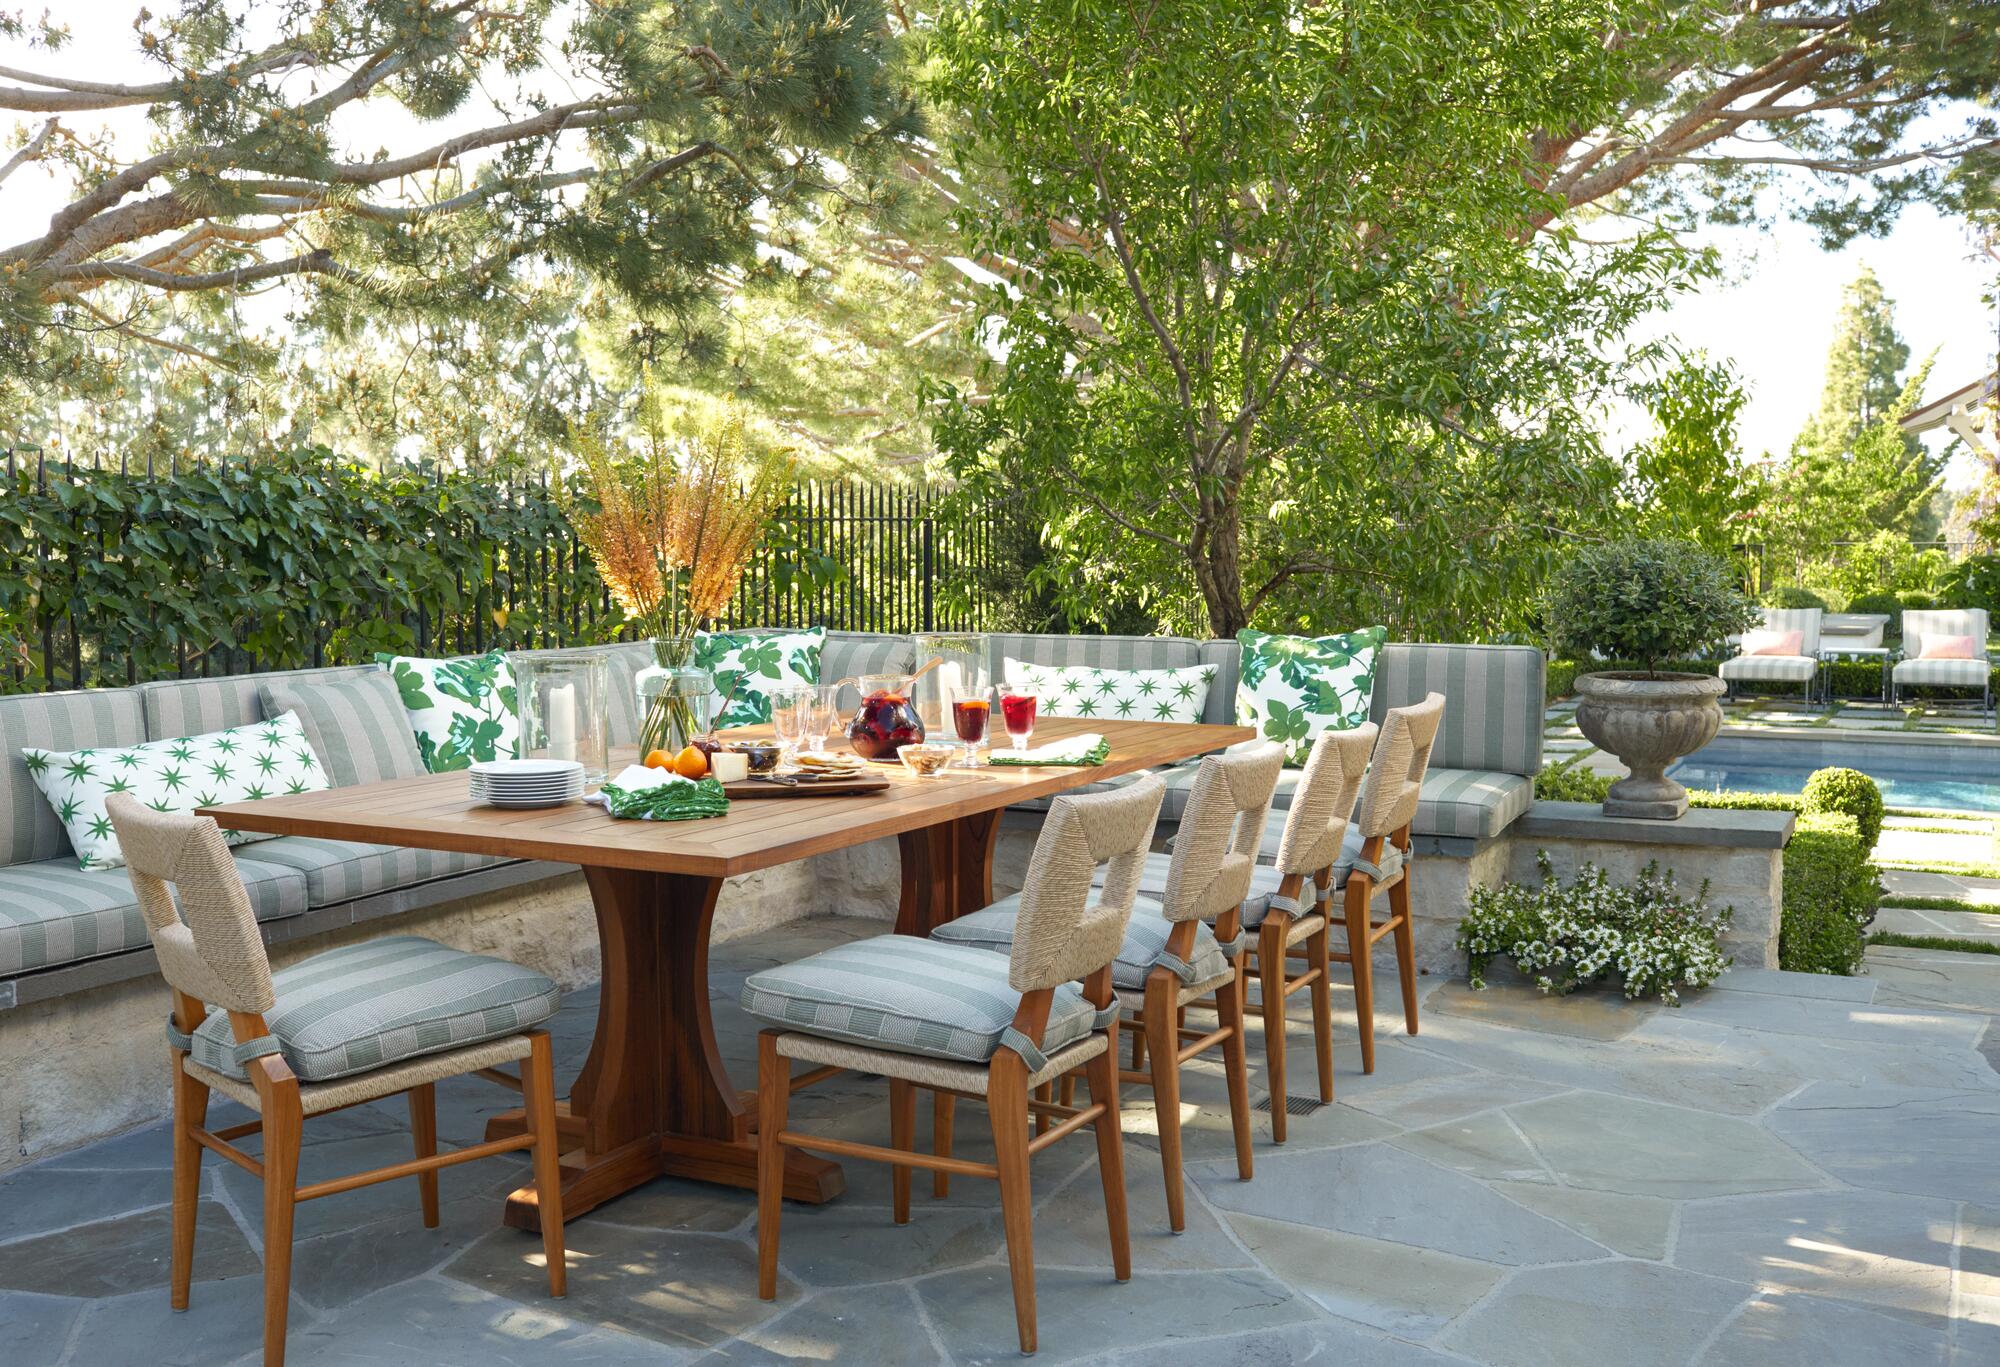 Patio table with Millionaire chairs